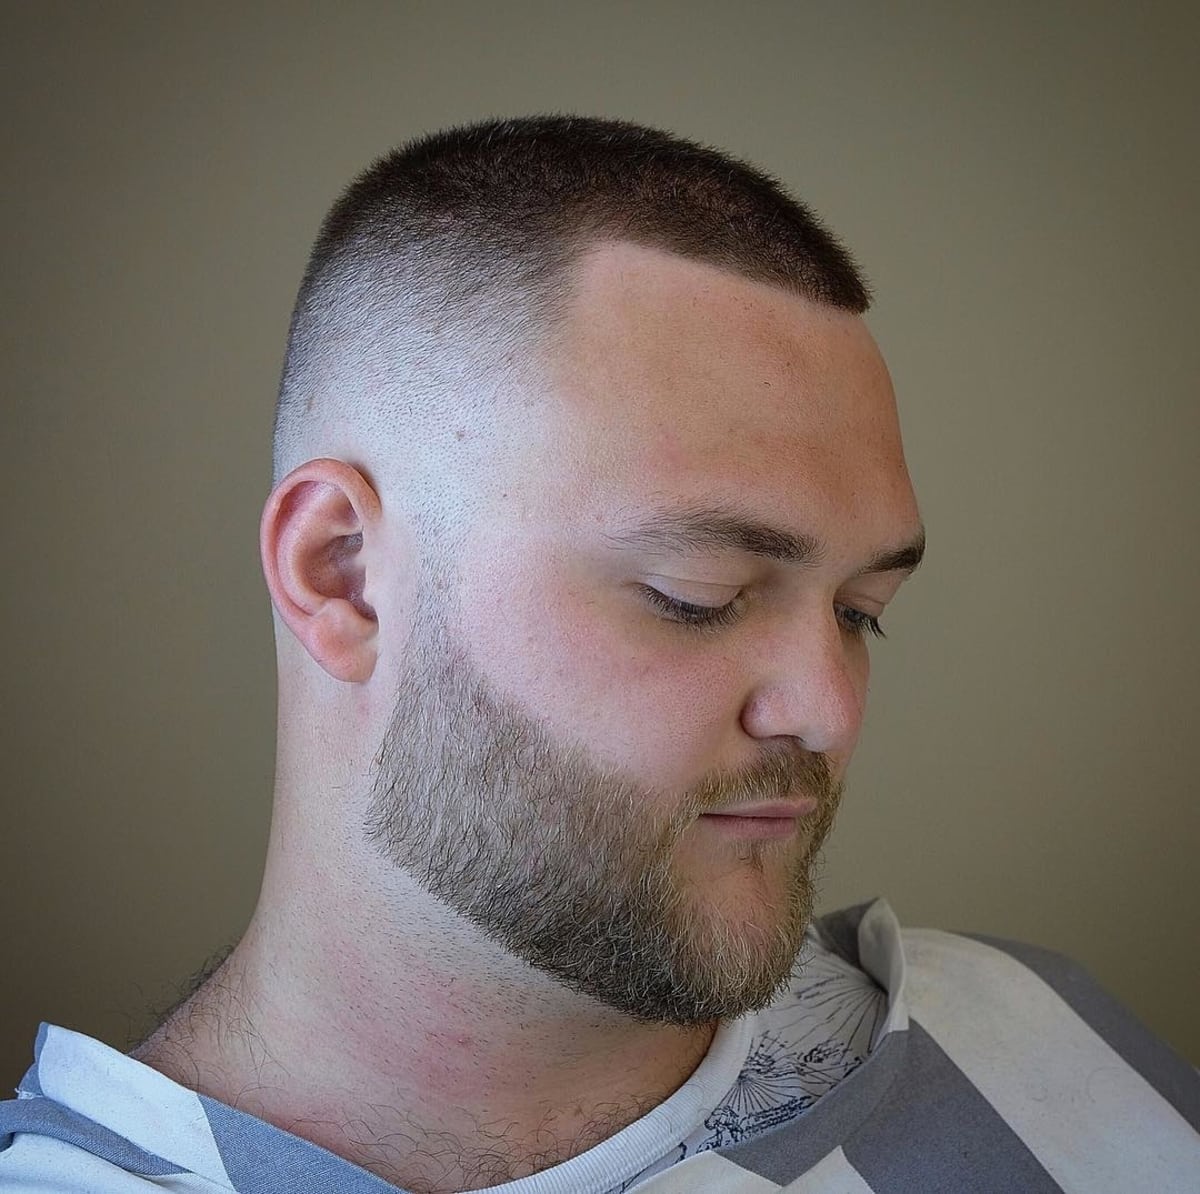 The Butch Cut with High Fade